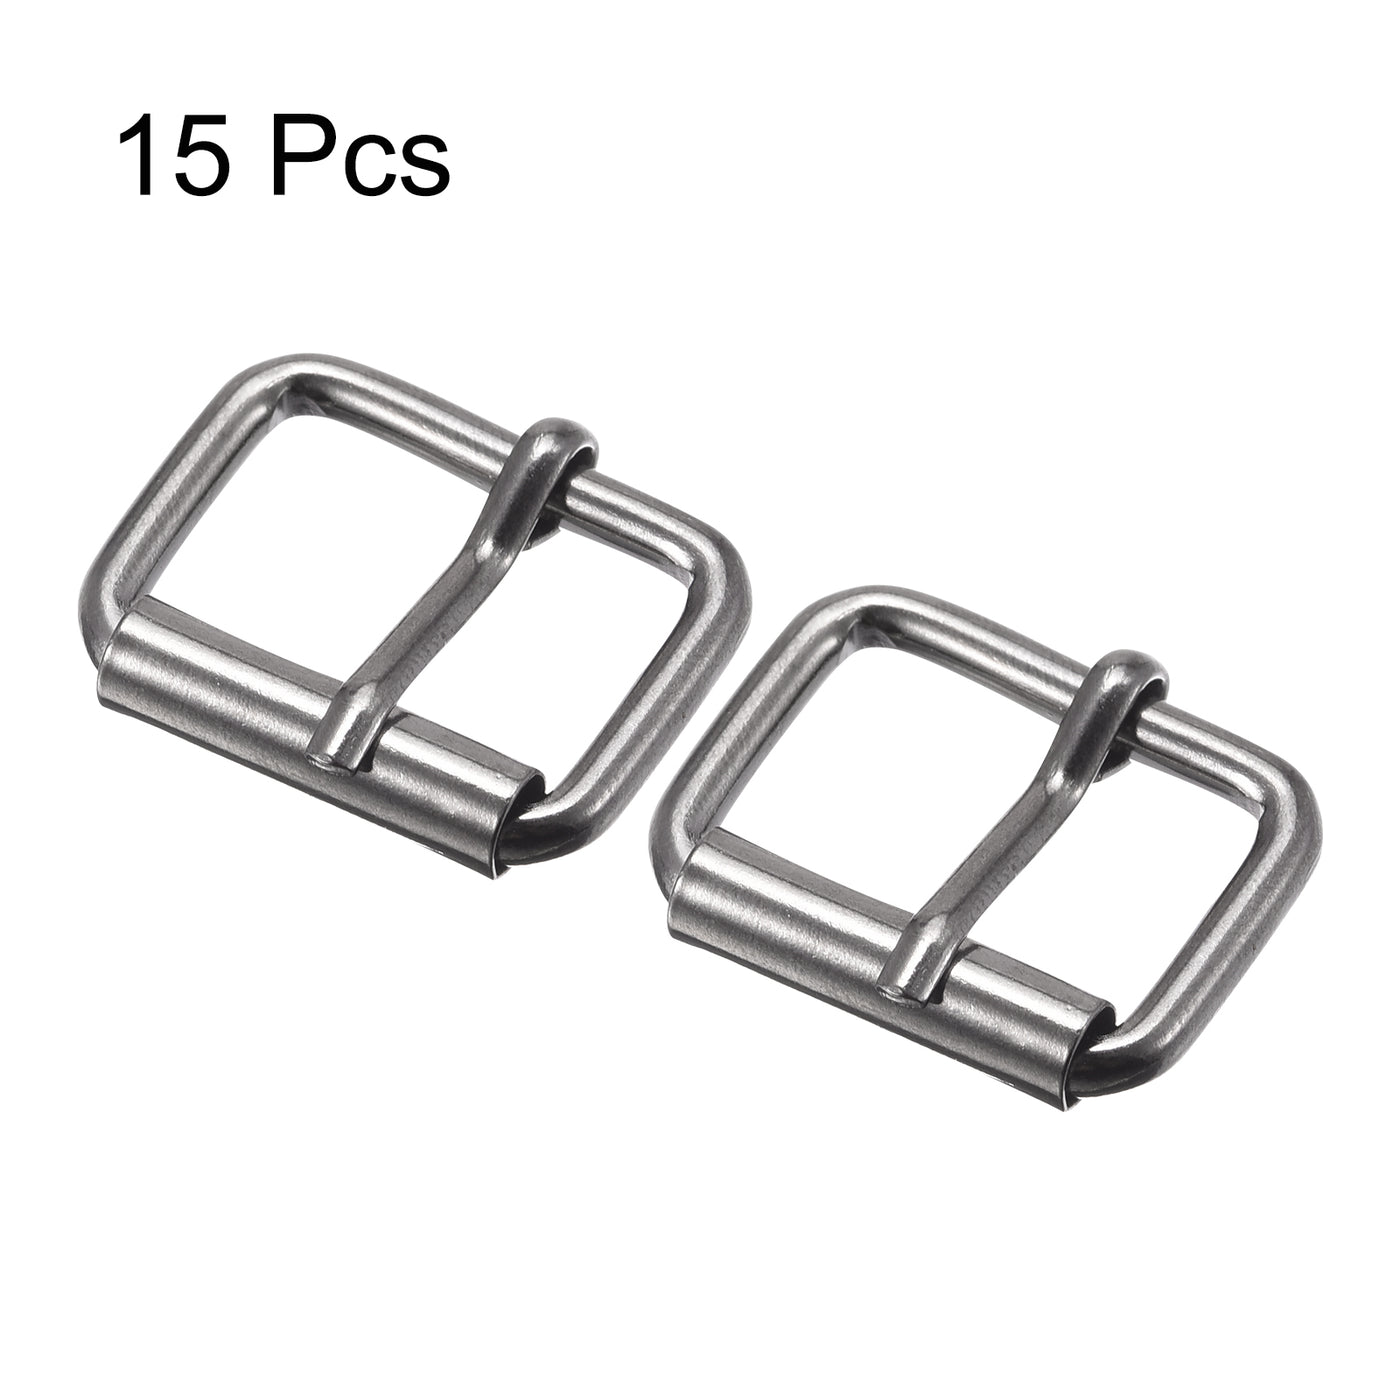 uxcell Uxcell 20mm(0.79") Metal Roller Buckles for Belts Bags Straps DIY Dark Gray 15pcs